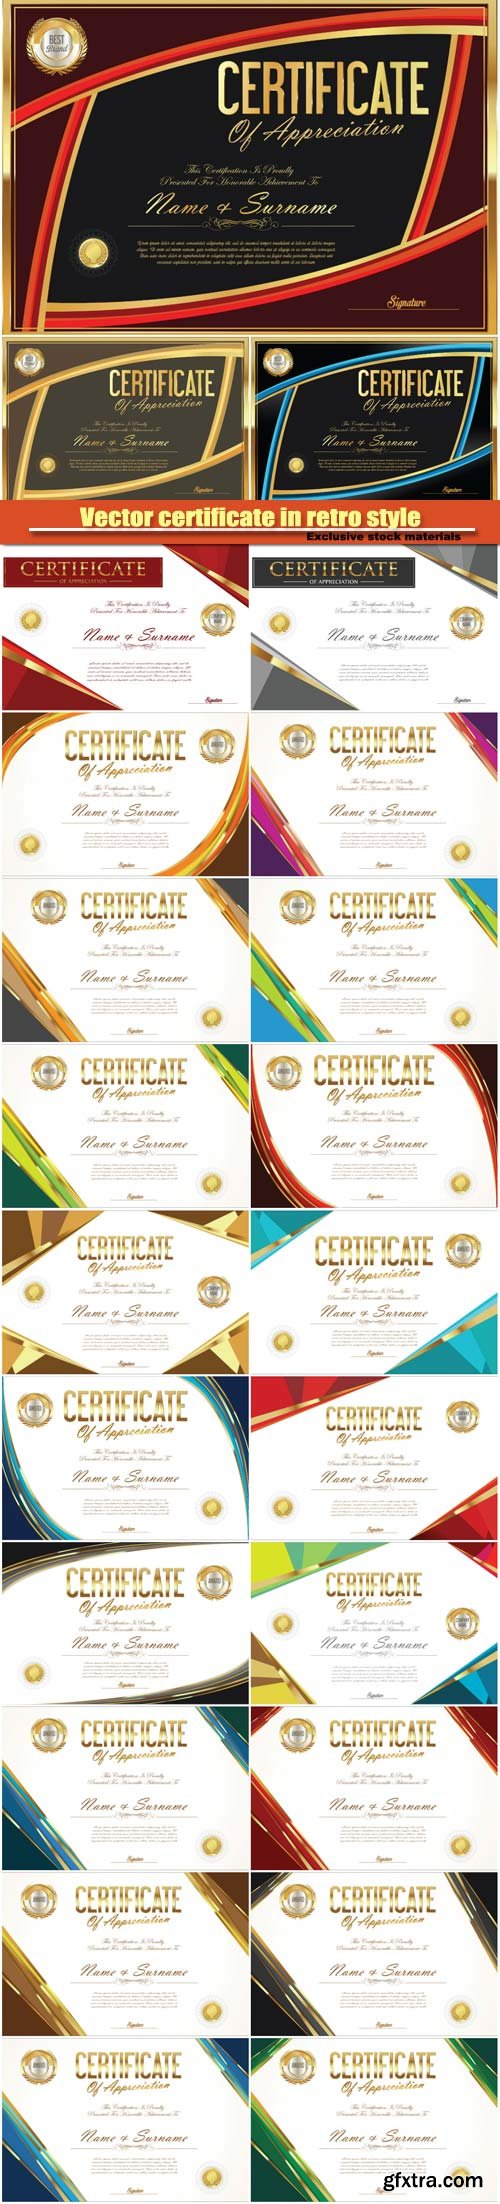 Vector certificate with a gold design in retro style